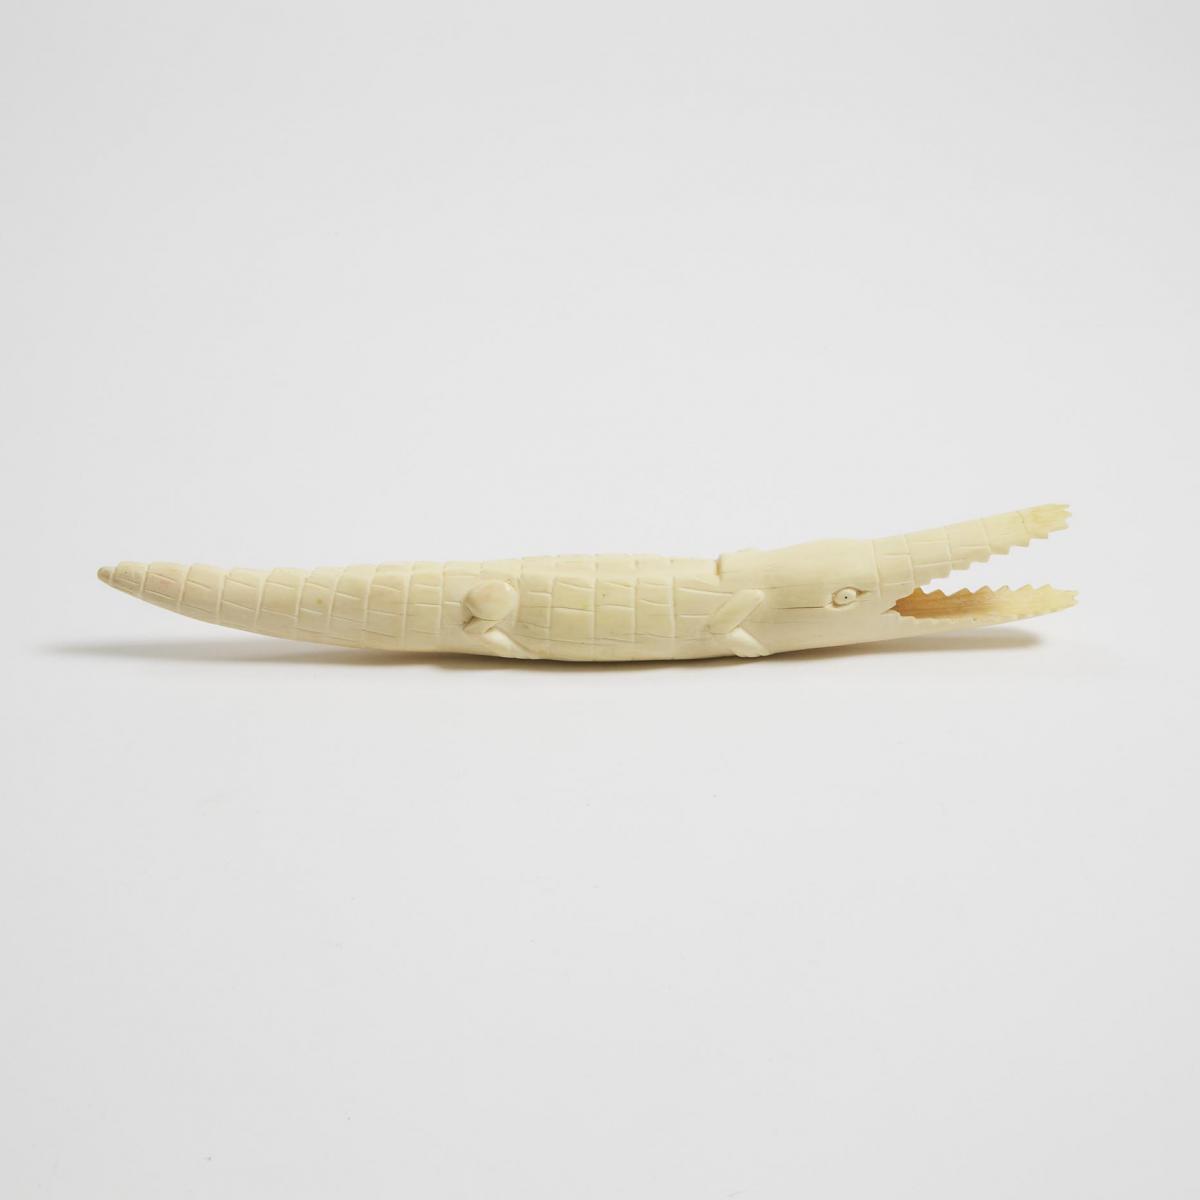 African Carved Ivory Crocodile, mid 20th century, length 12.75 in — 32.4 cm